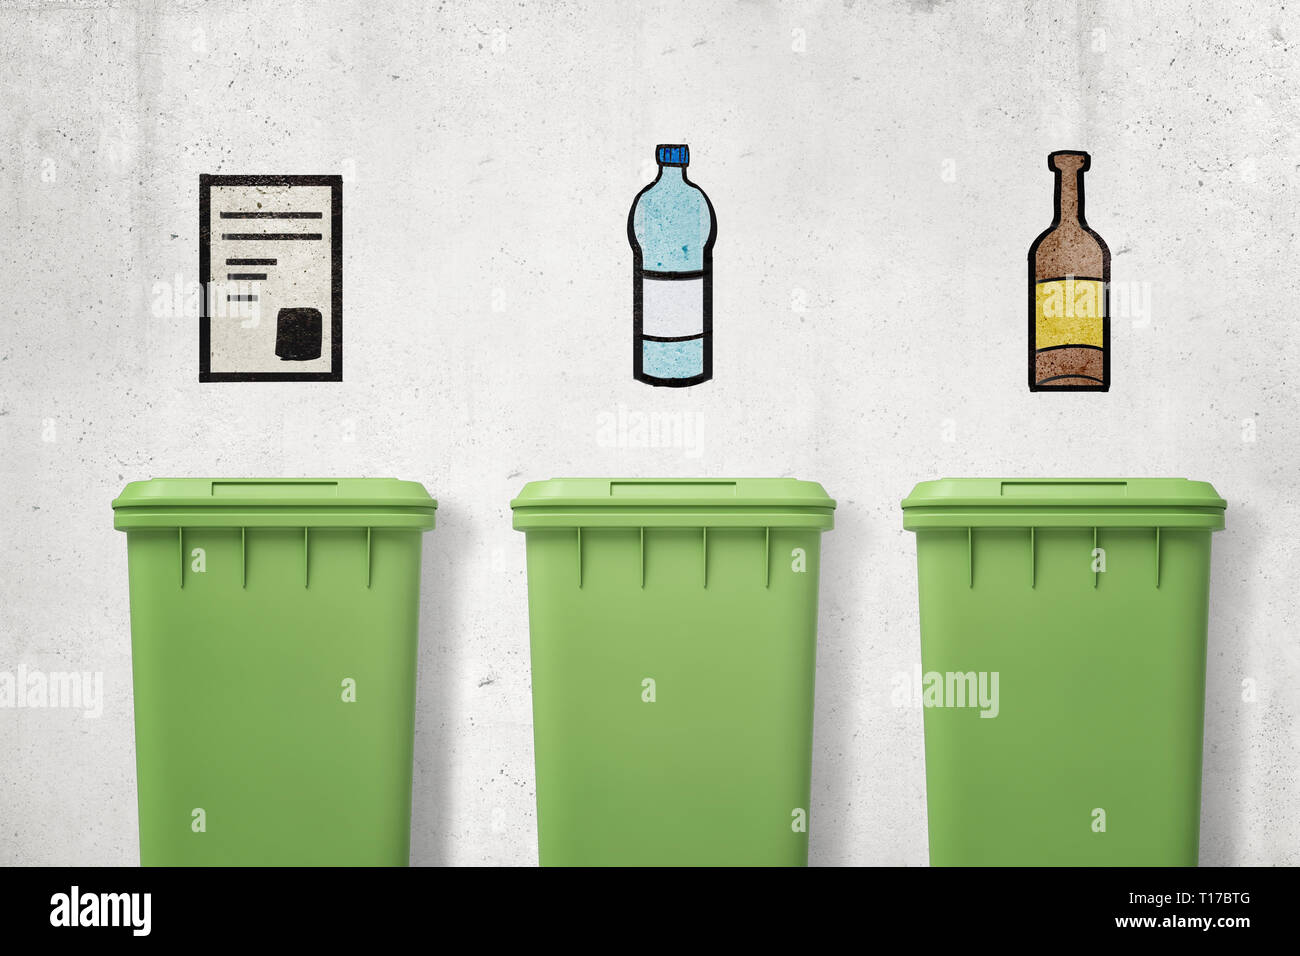 3d rendering of three green trash cans with drawings of paper, plastic and glass on wall above them showing which can is for which type of waste. Stock Photo